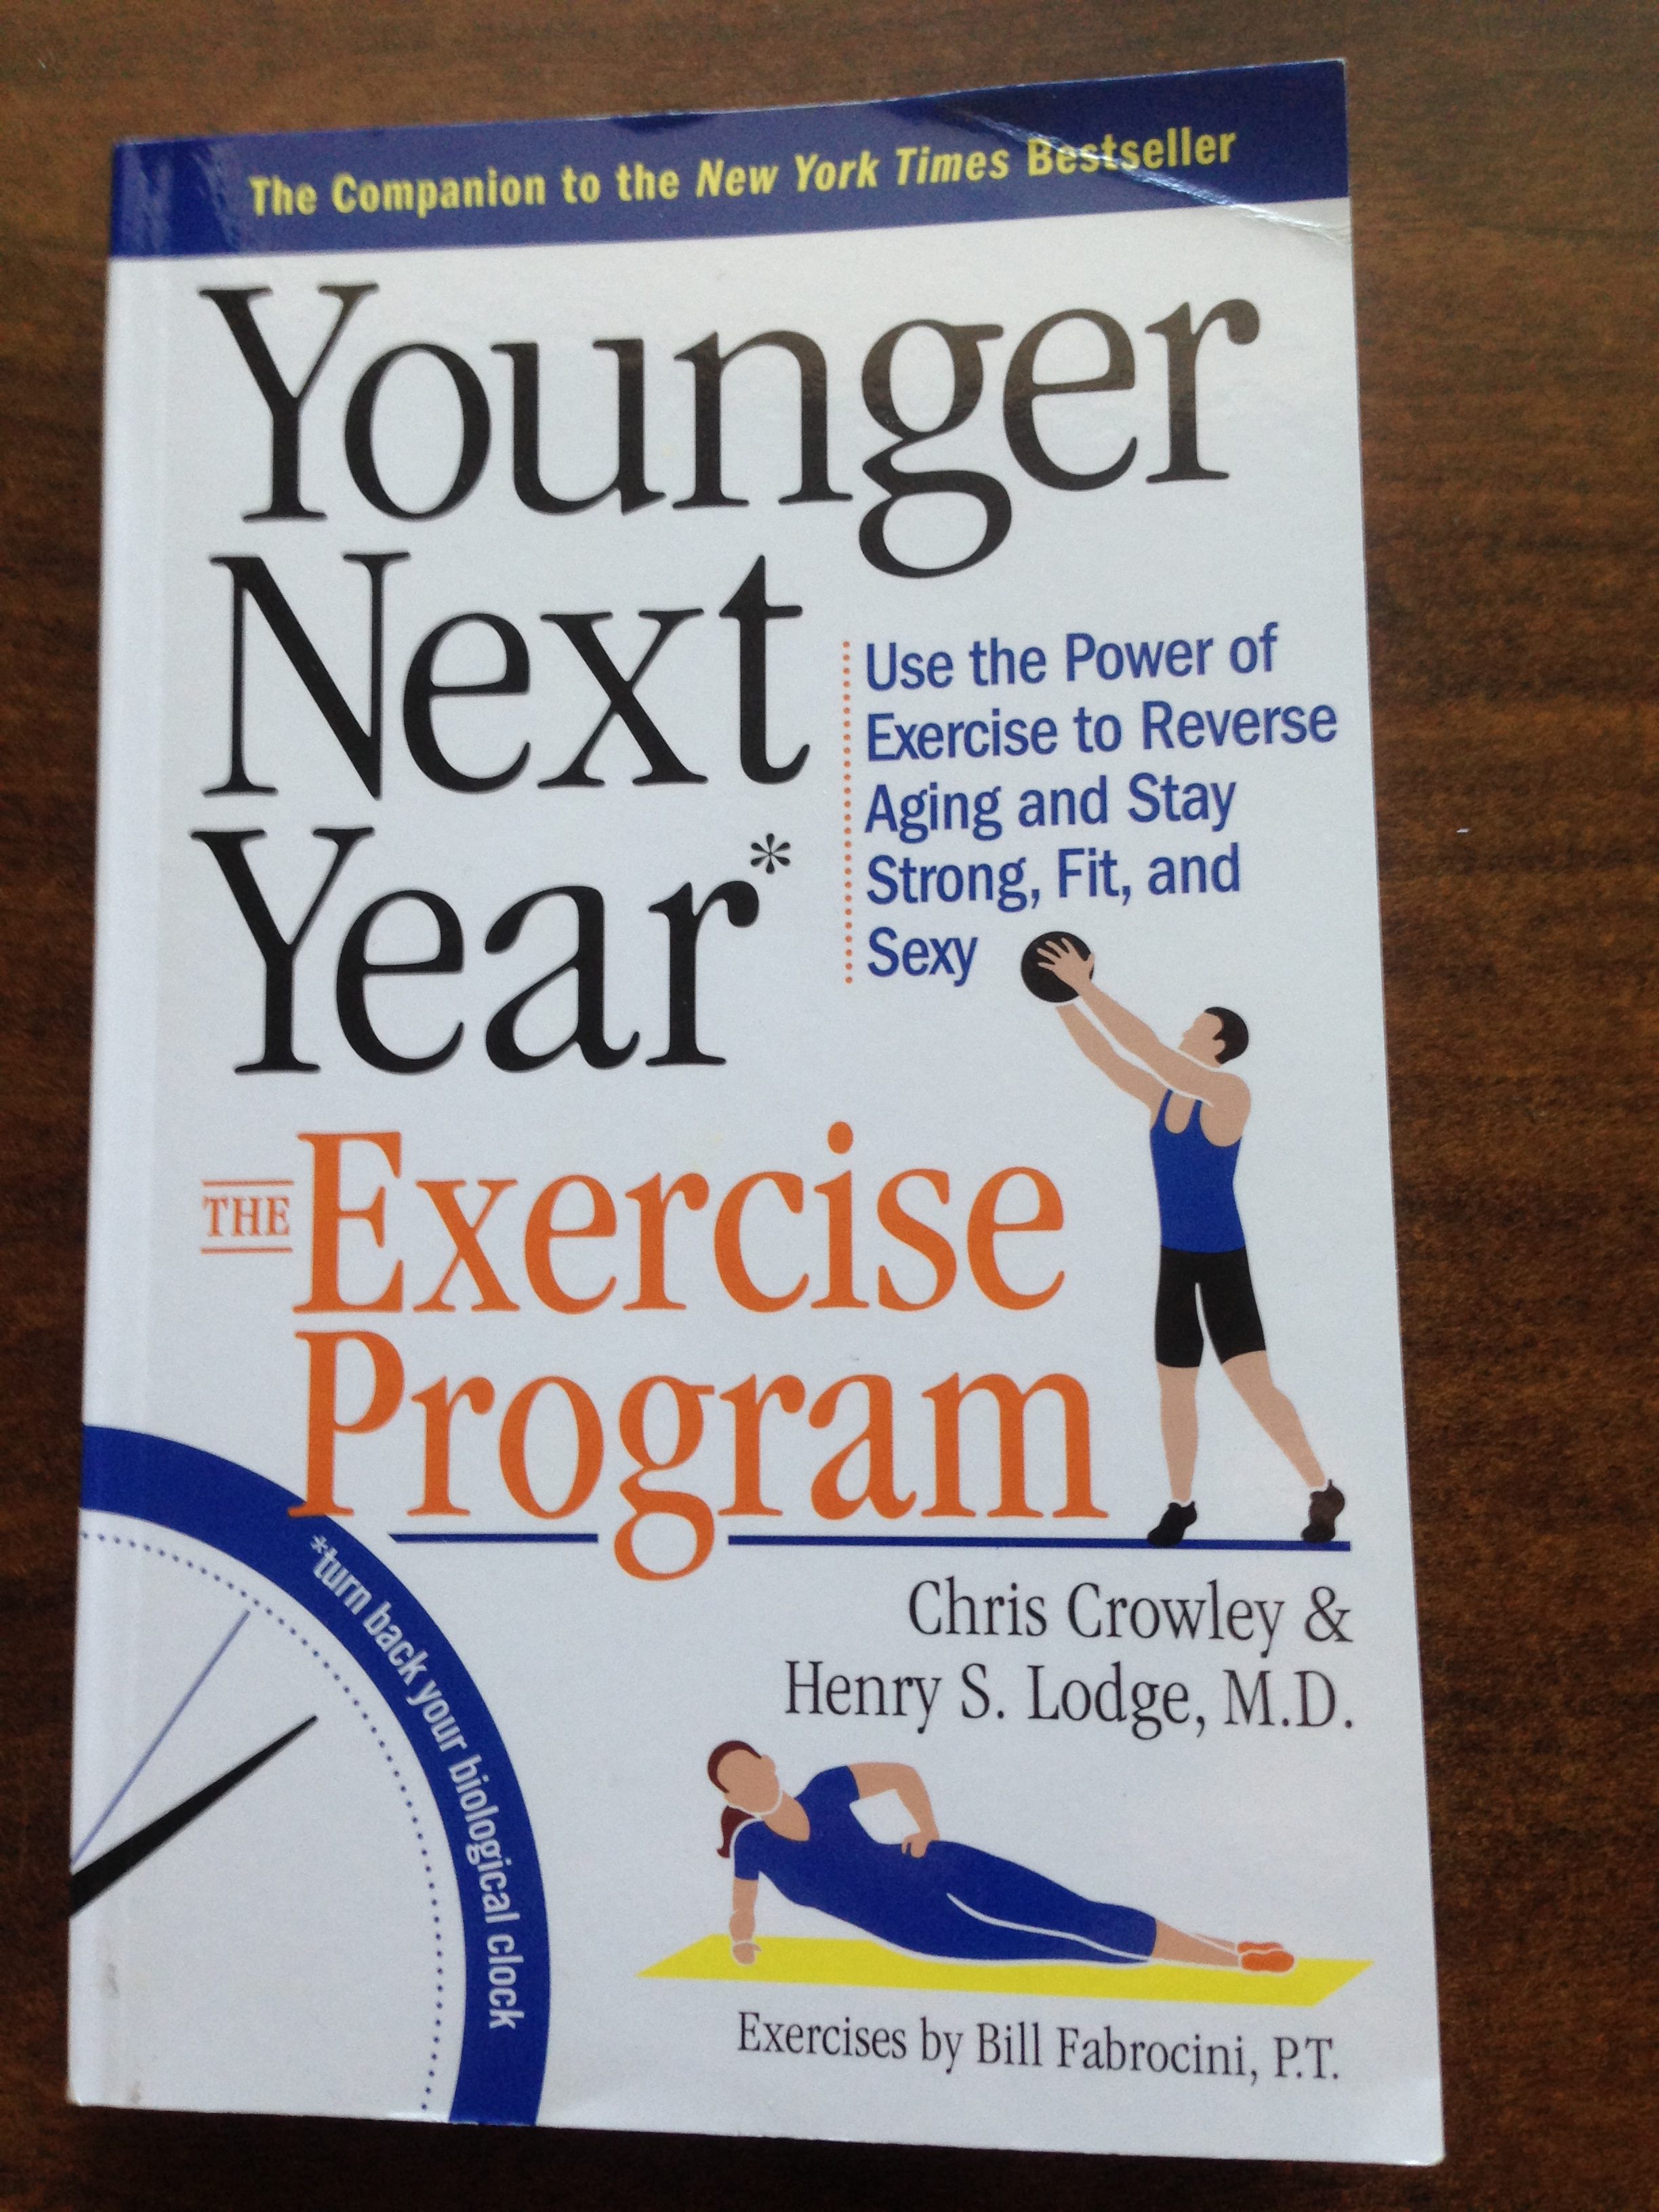 YOUNGER NEXT YEAR: THE EXERCISE PROGRAM